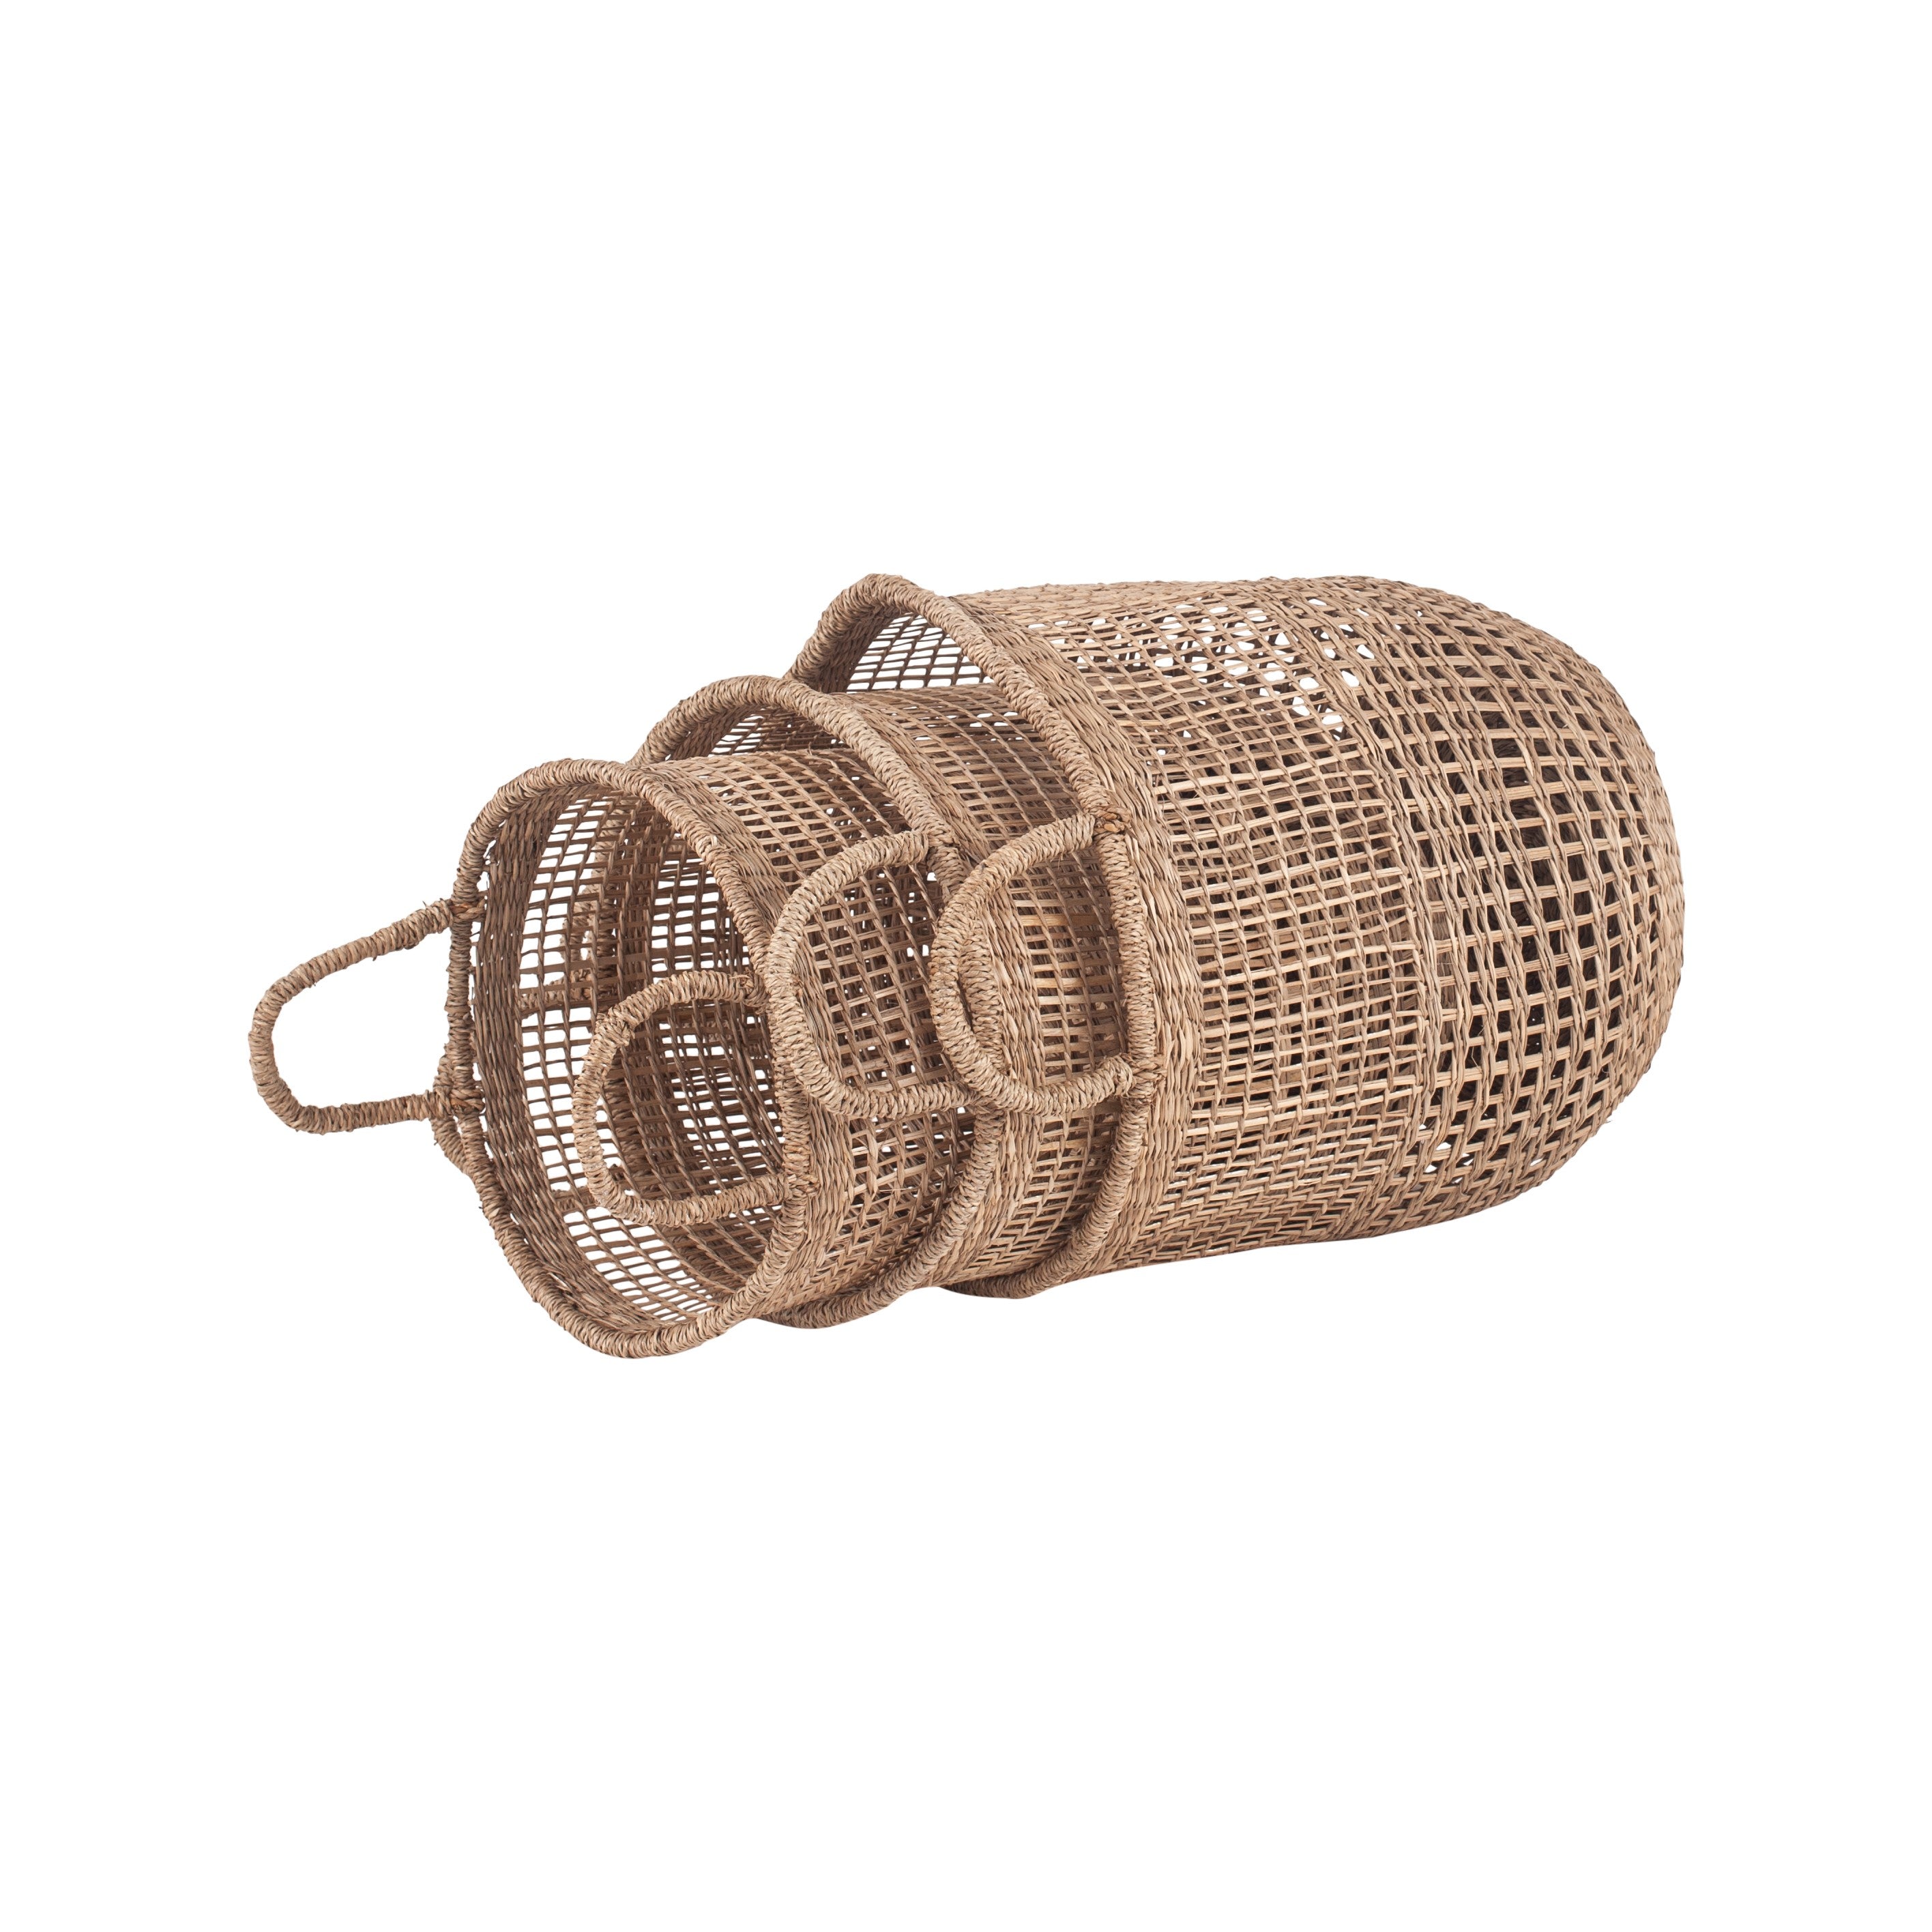 Set of 3 Open Weave Seagrass Round Handled Baskets